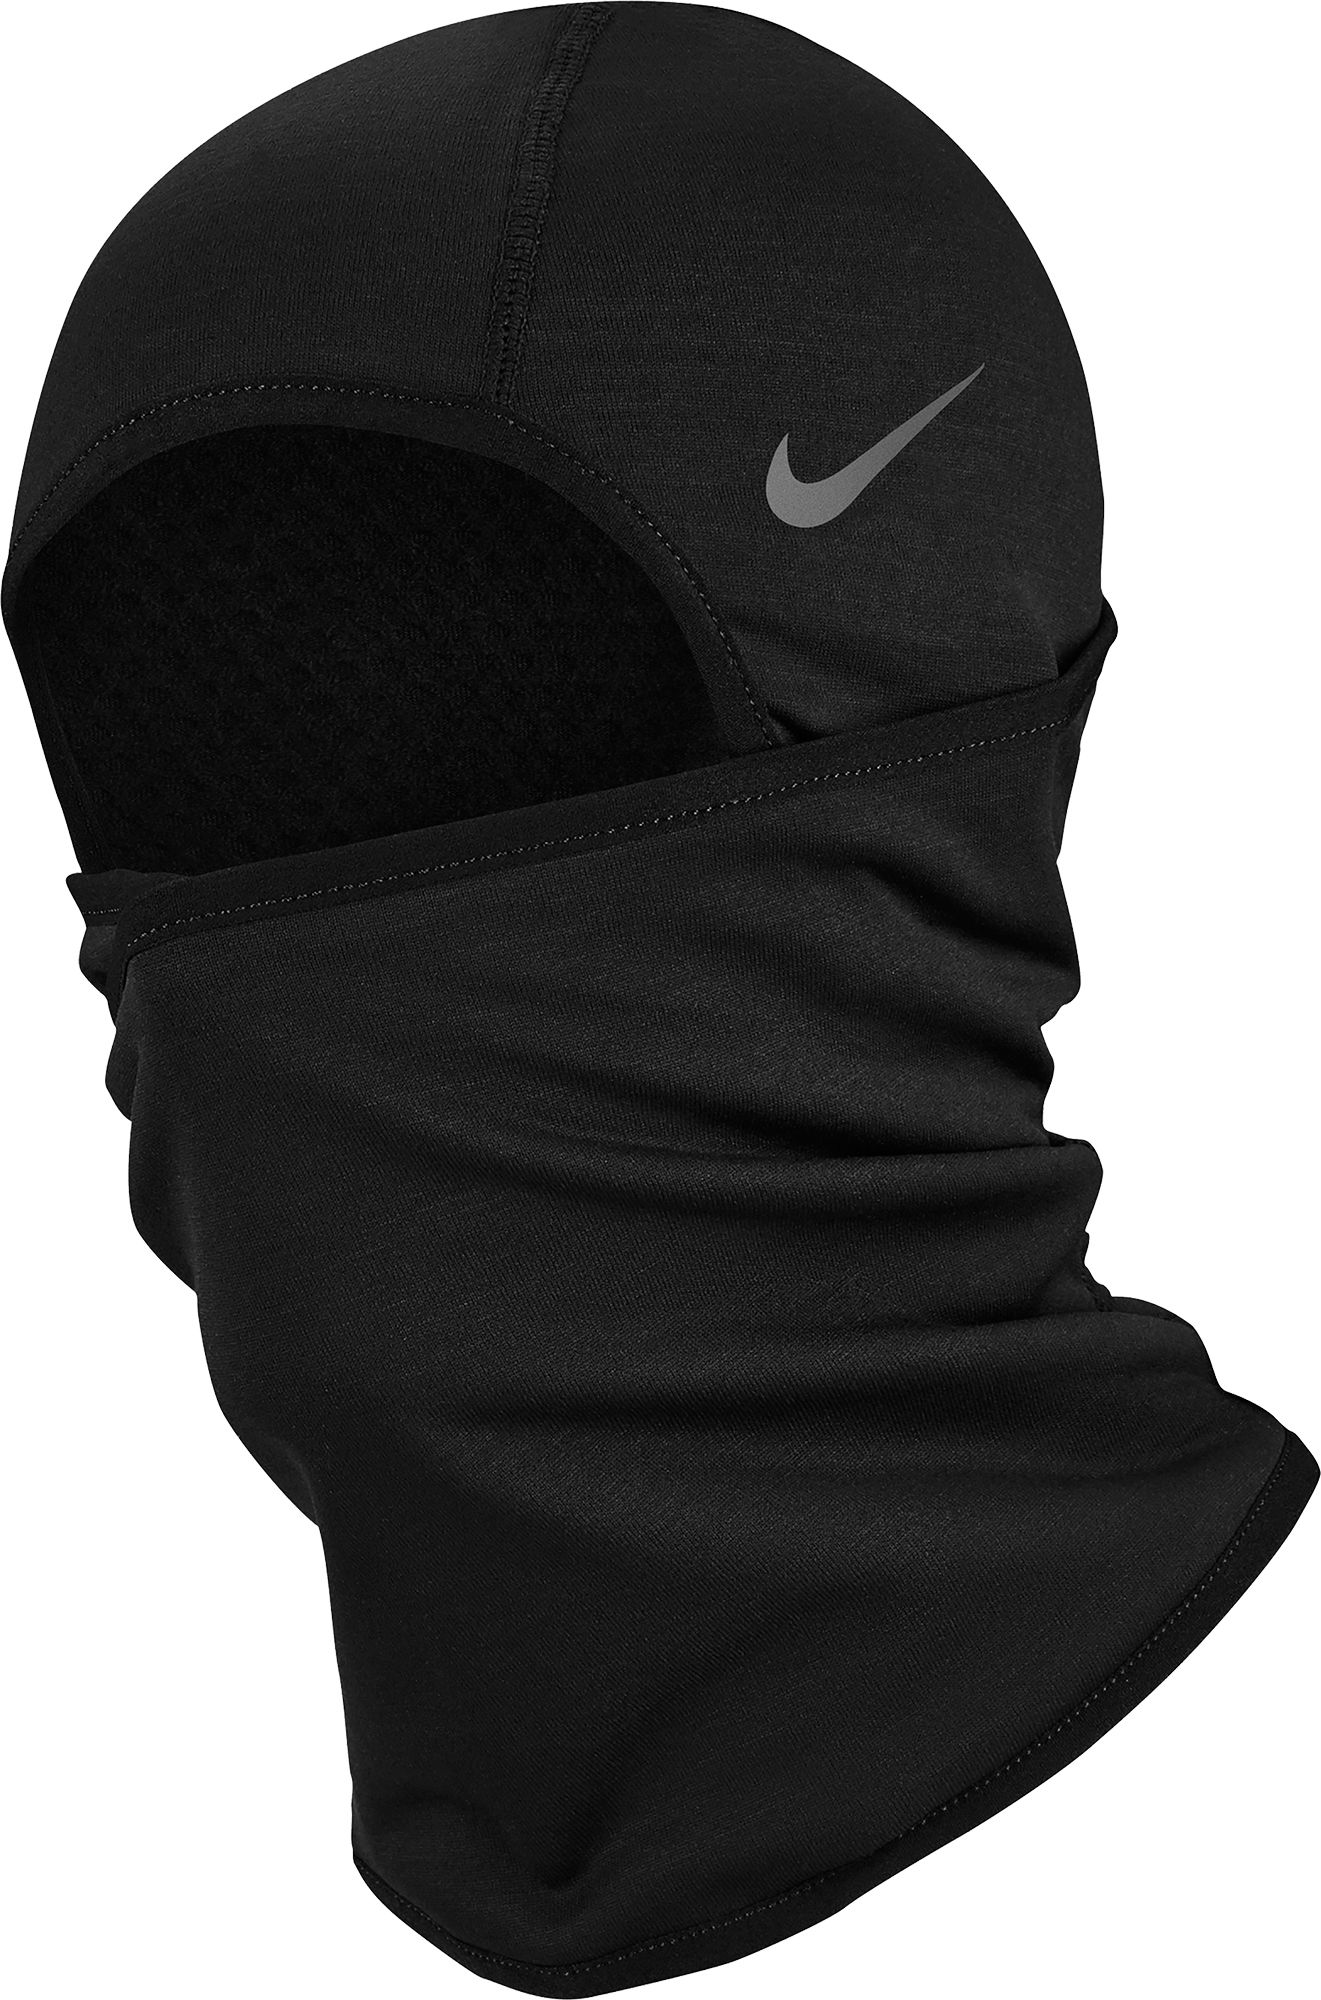 therma sphere neck warmer